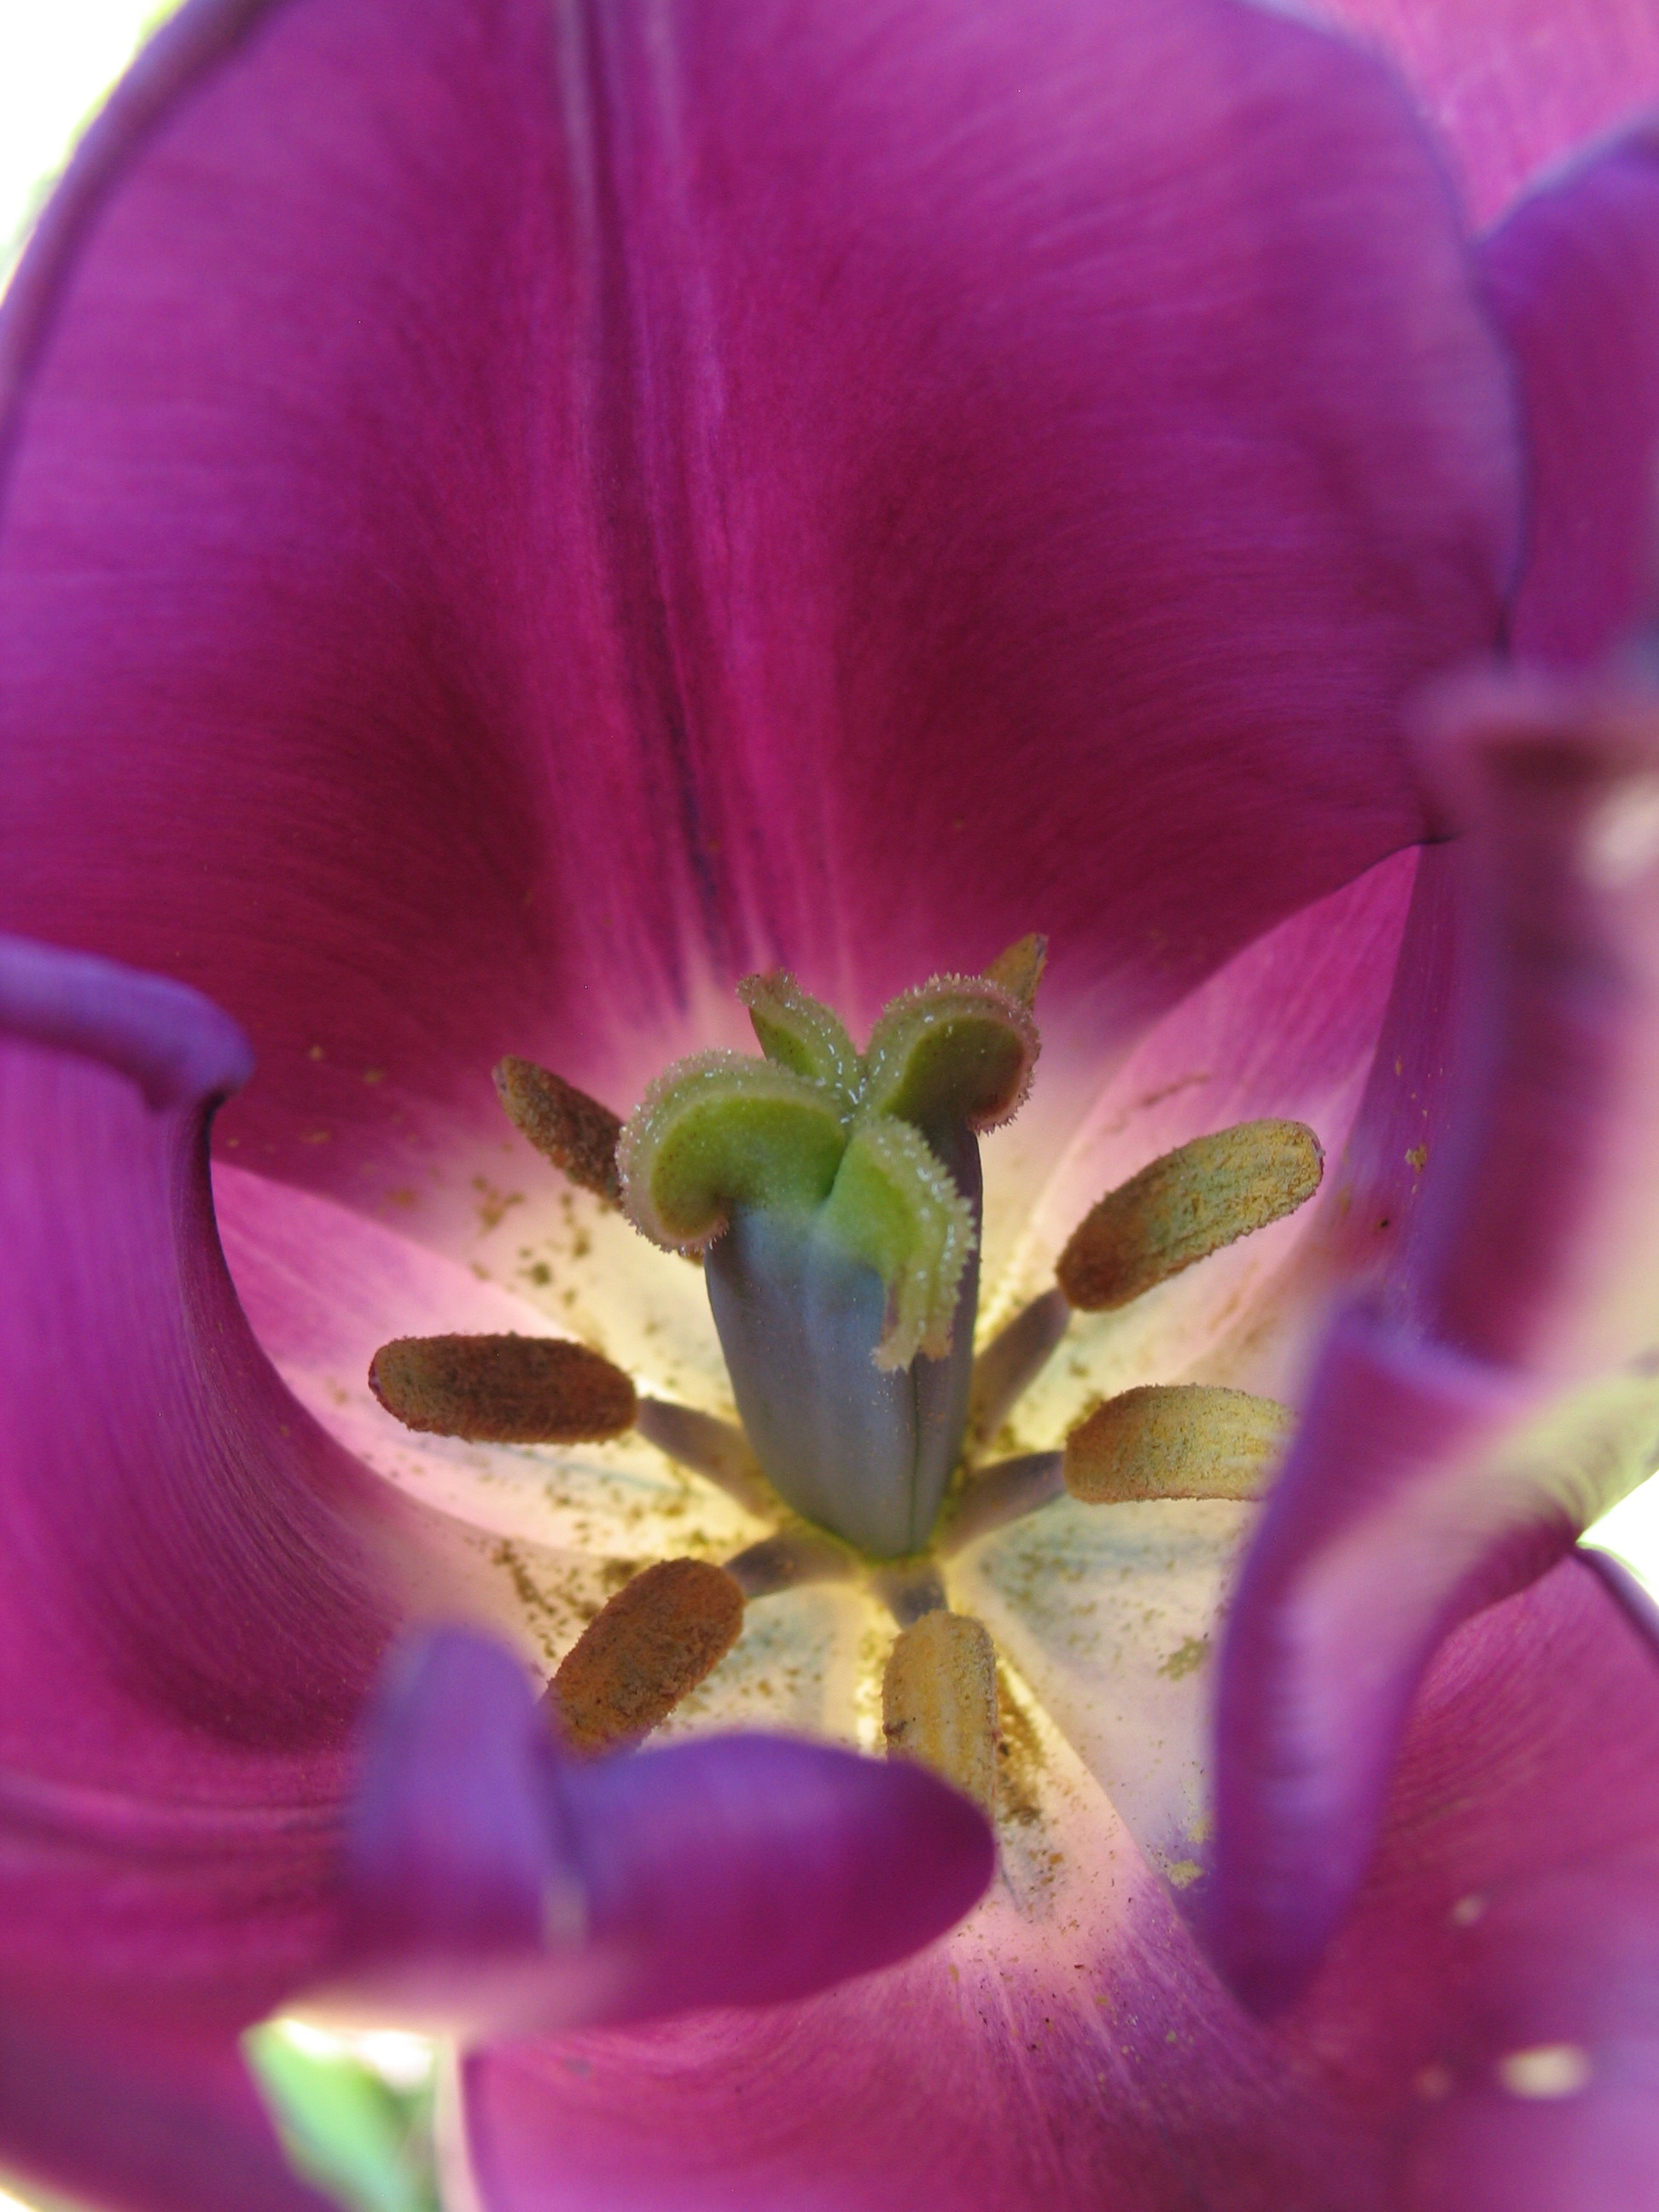 Close-up of a flower's stamen covered in pollen